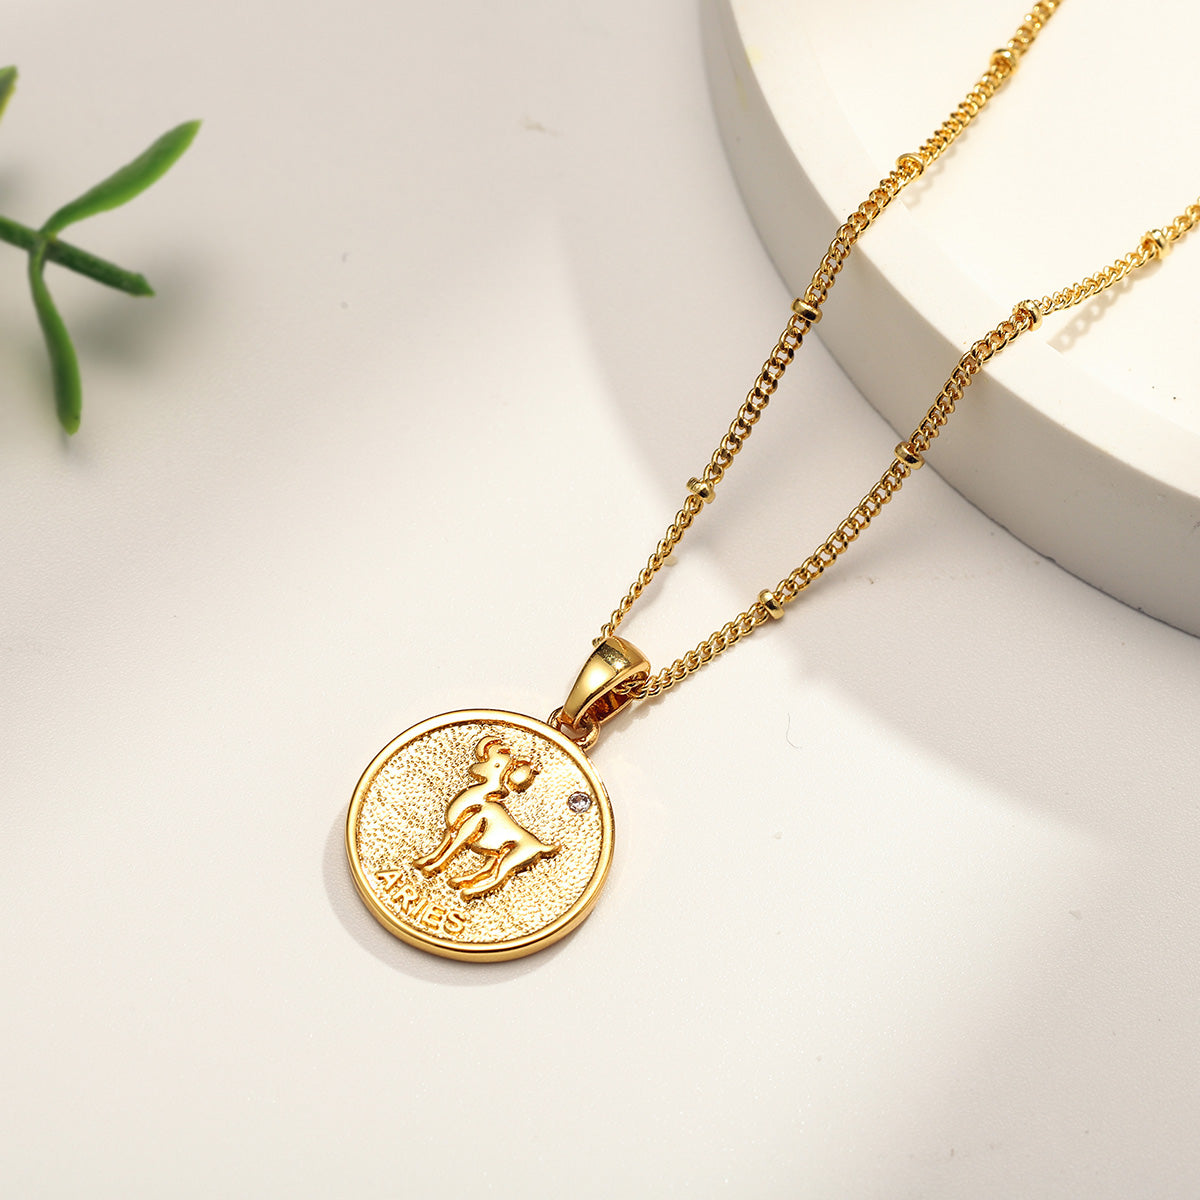 Aries Constellation Coin Pendant Brass Necklace